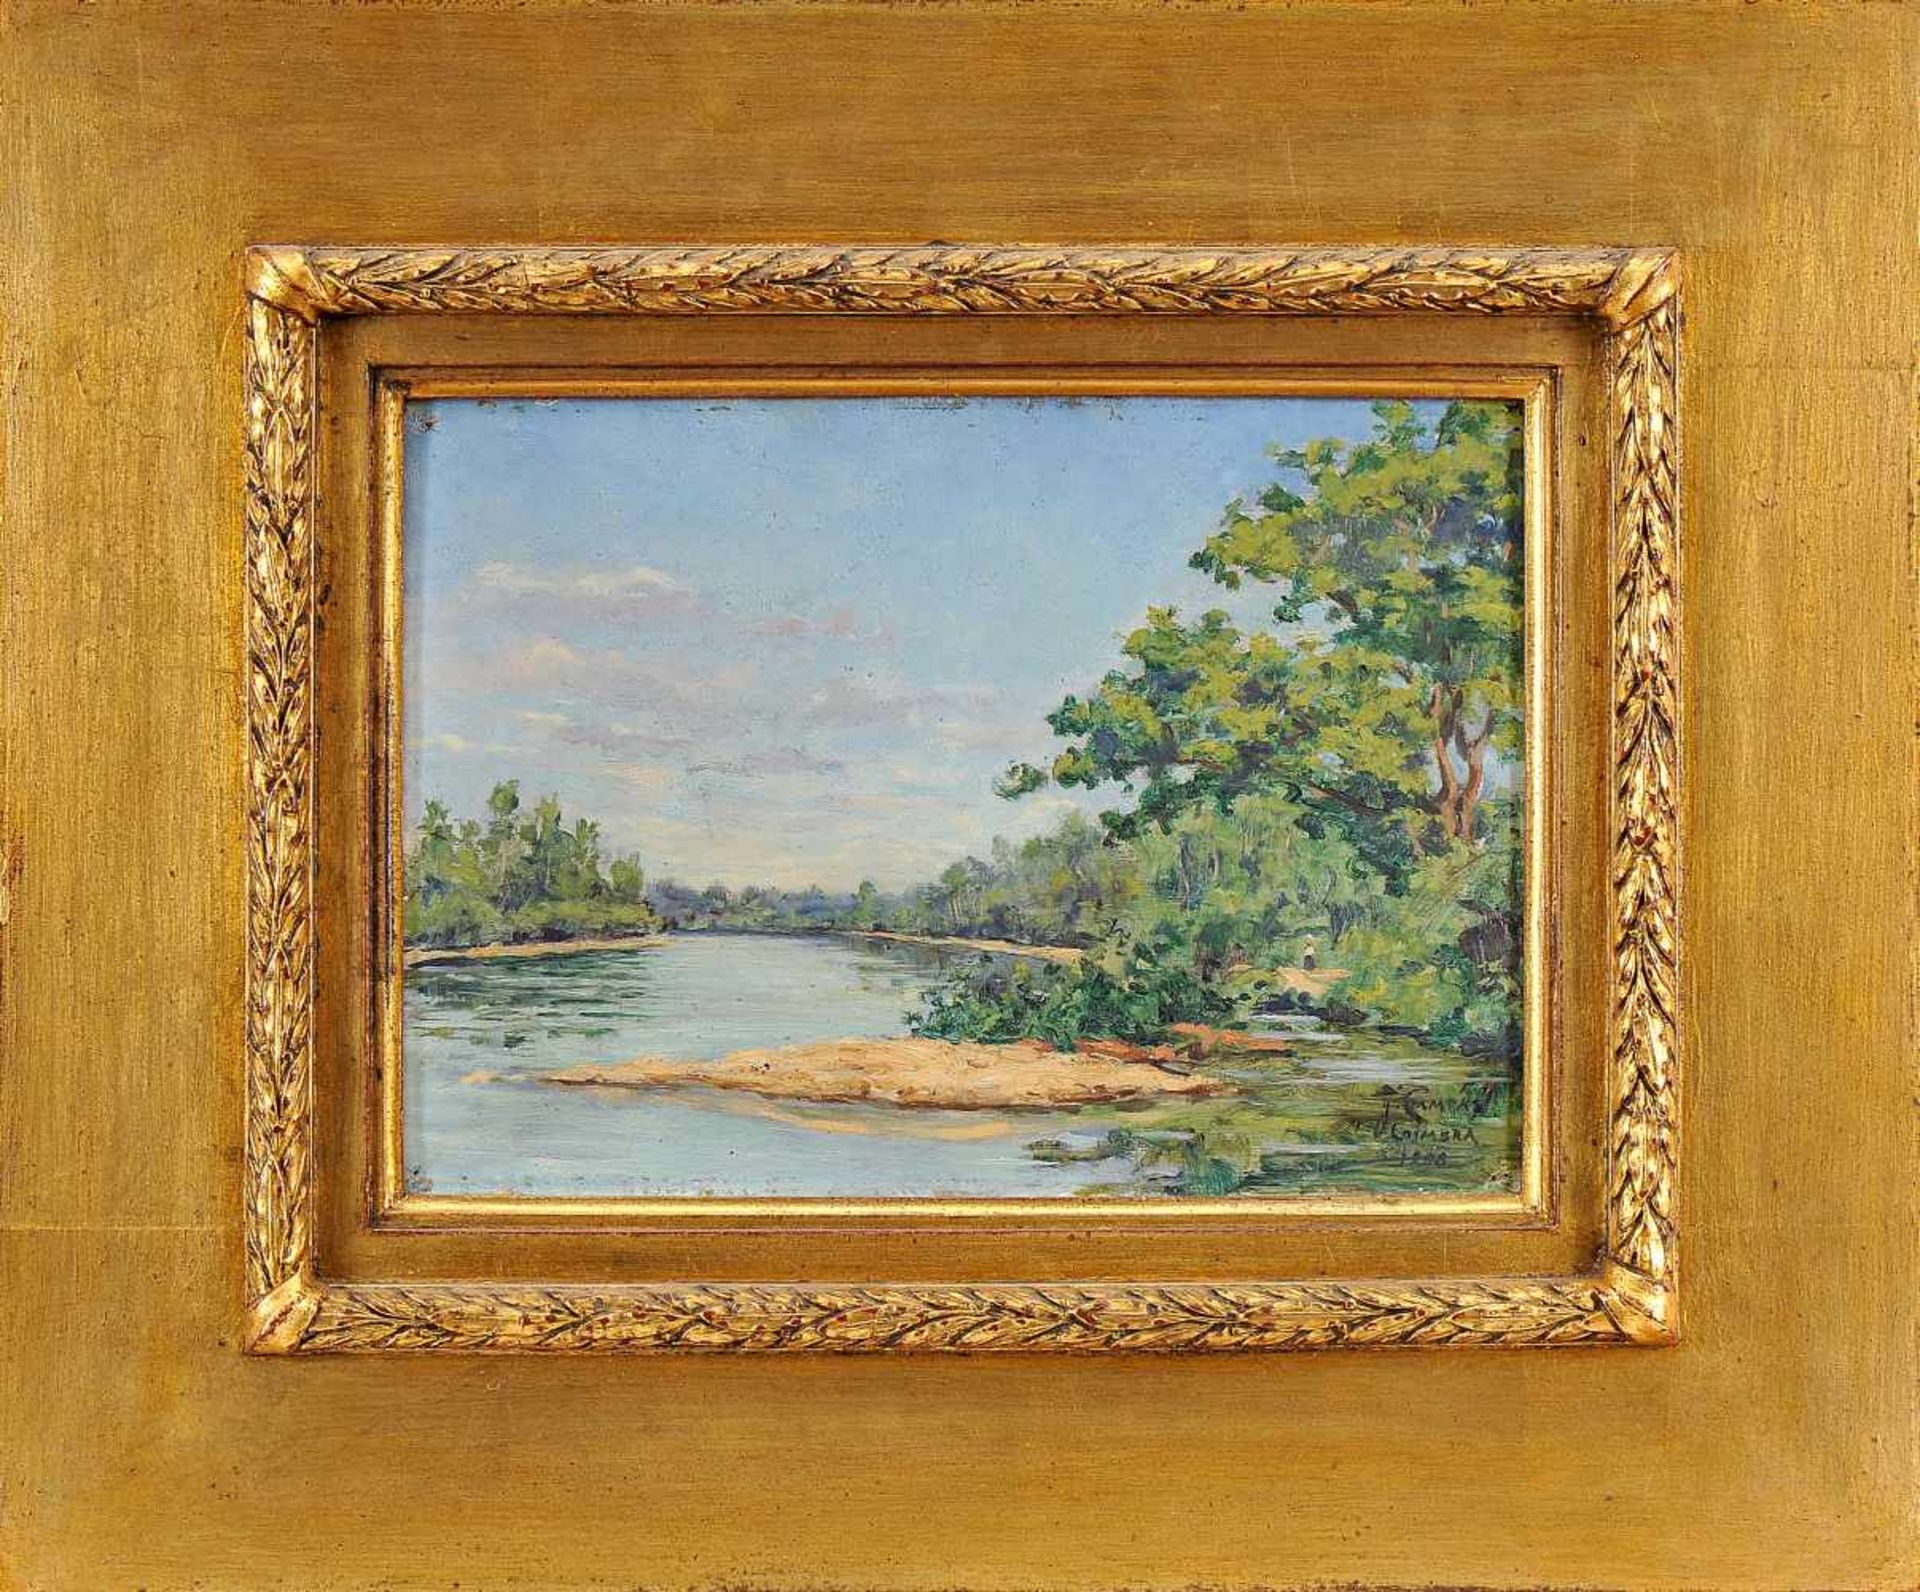 JOSÉ CAMPAS - 1888-1971, The Mondego River and the Choupal, oil on wood, Signed and dated